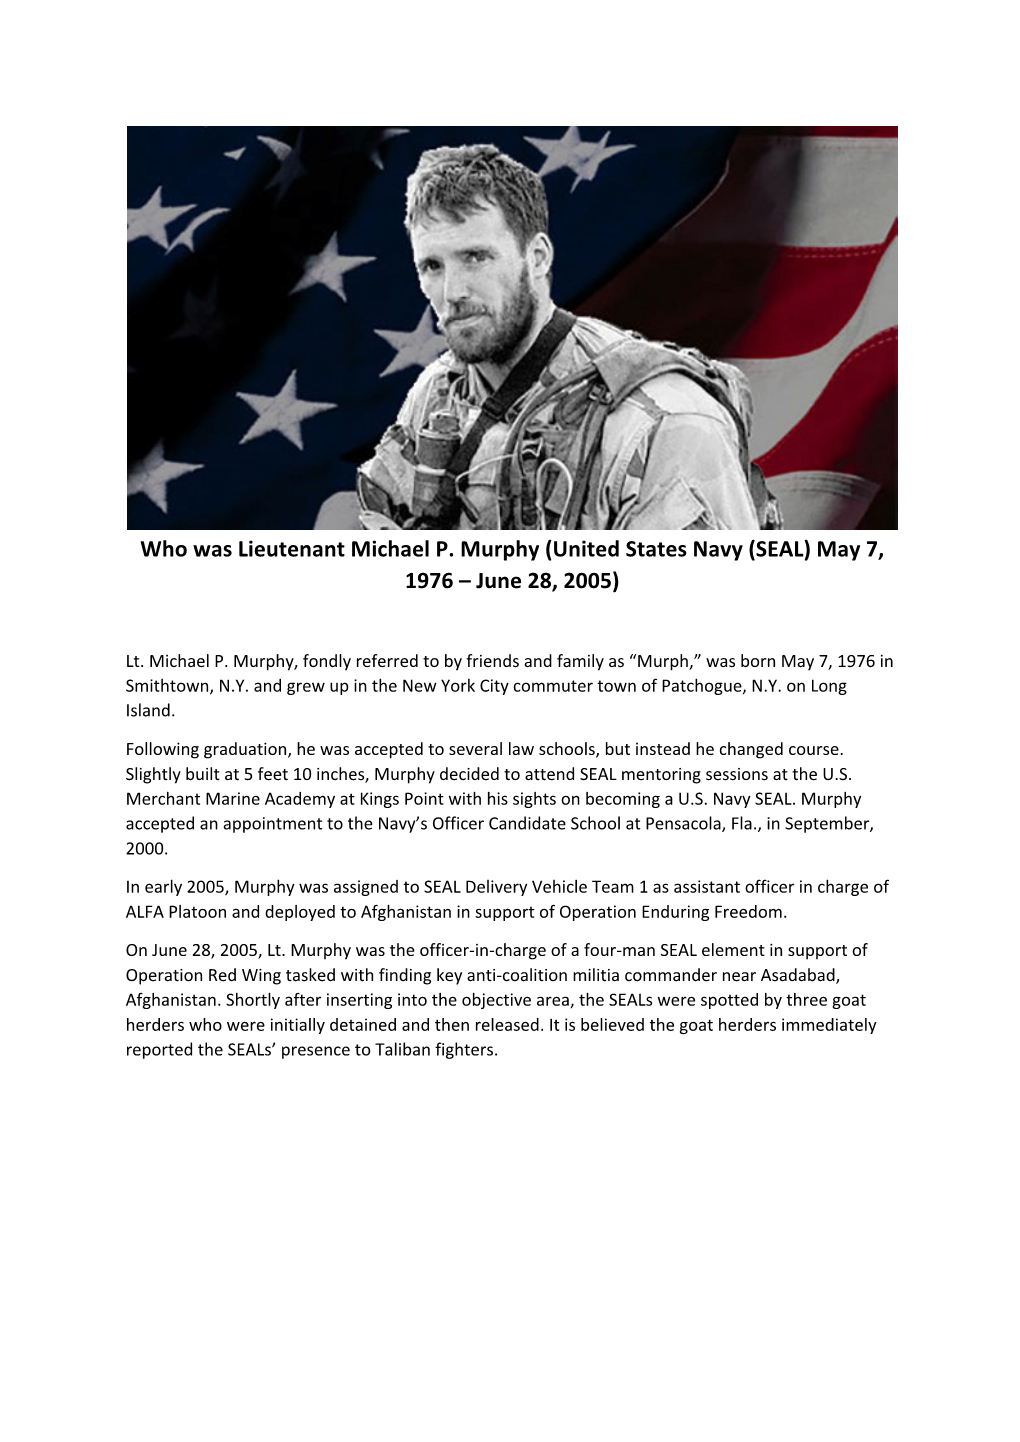 Who Was Lieutenant Michael P. Murphy (United States Navy (SEAL) May 7, 1976 – June 28, 2005)